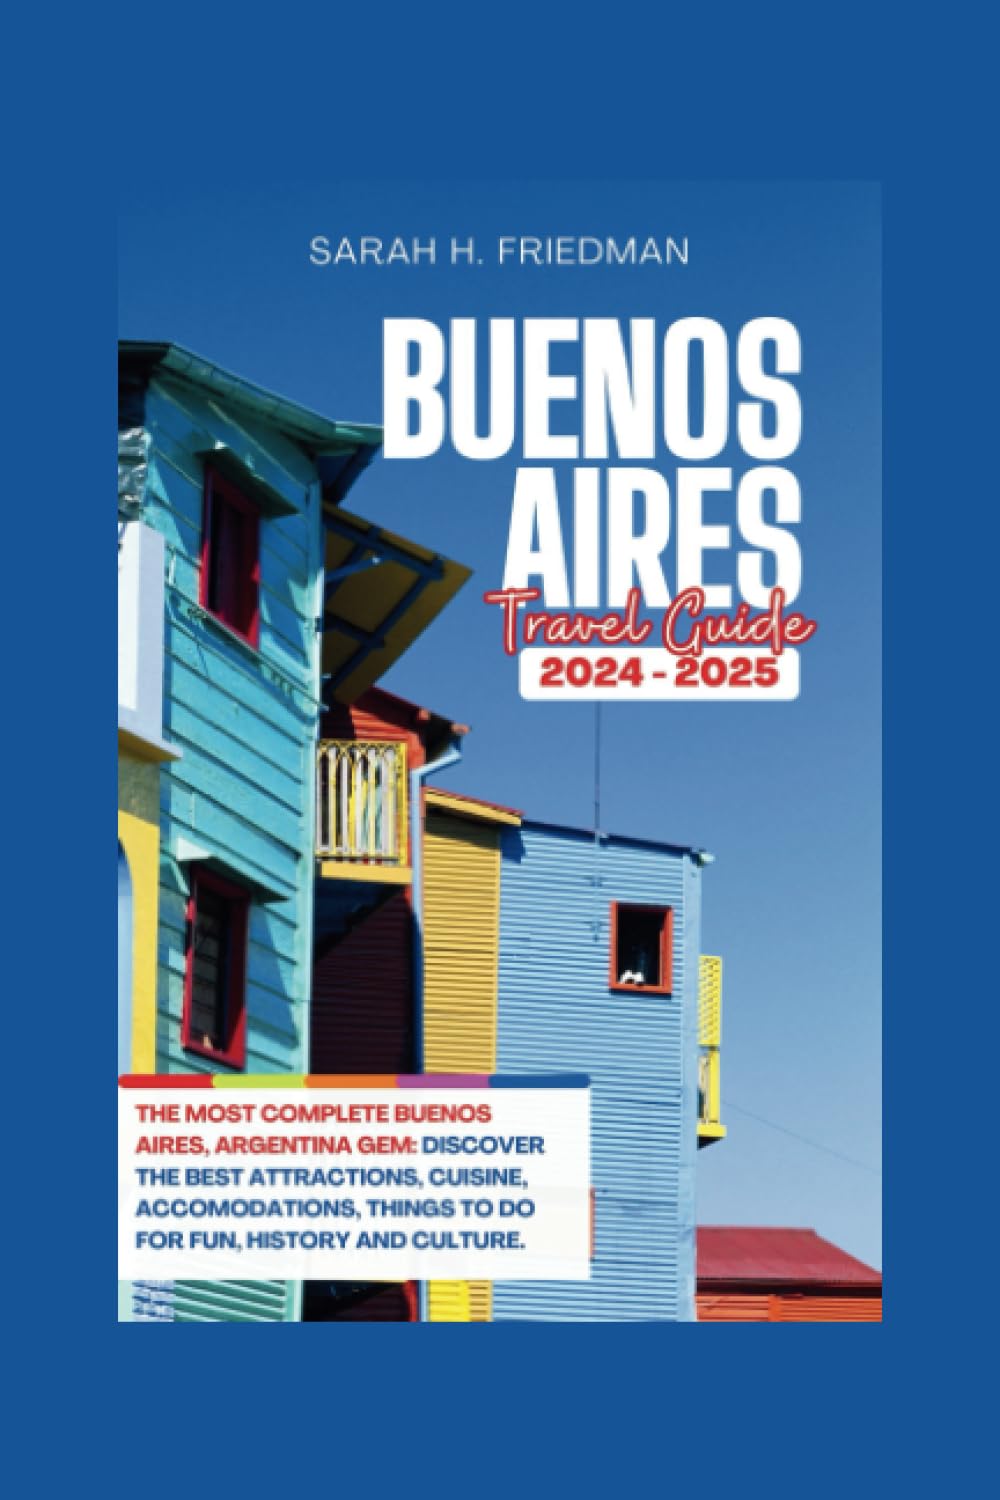 Buenos Aires Travel Guide 2024-2025: The Most Complete Buenos Aires, Argentina Gem: Discover The Best Attractions, Cuisine, accomodations, Things To Do For Fun, History And Culture.